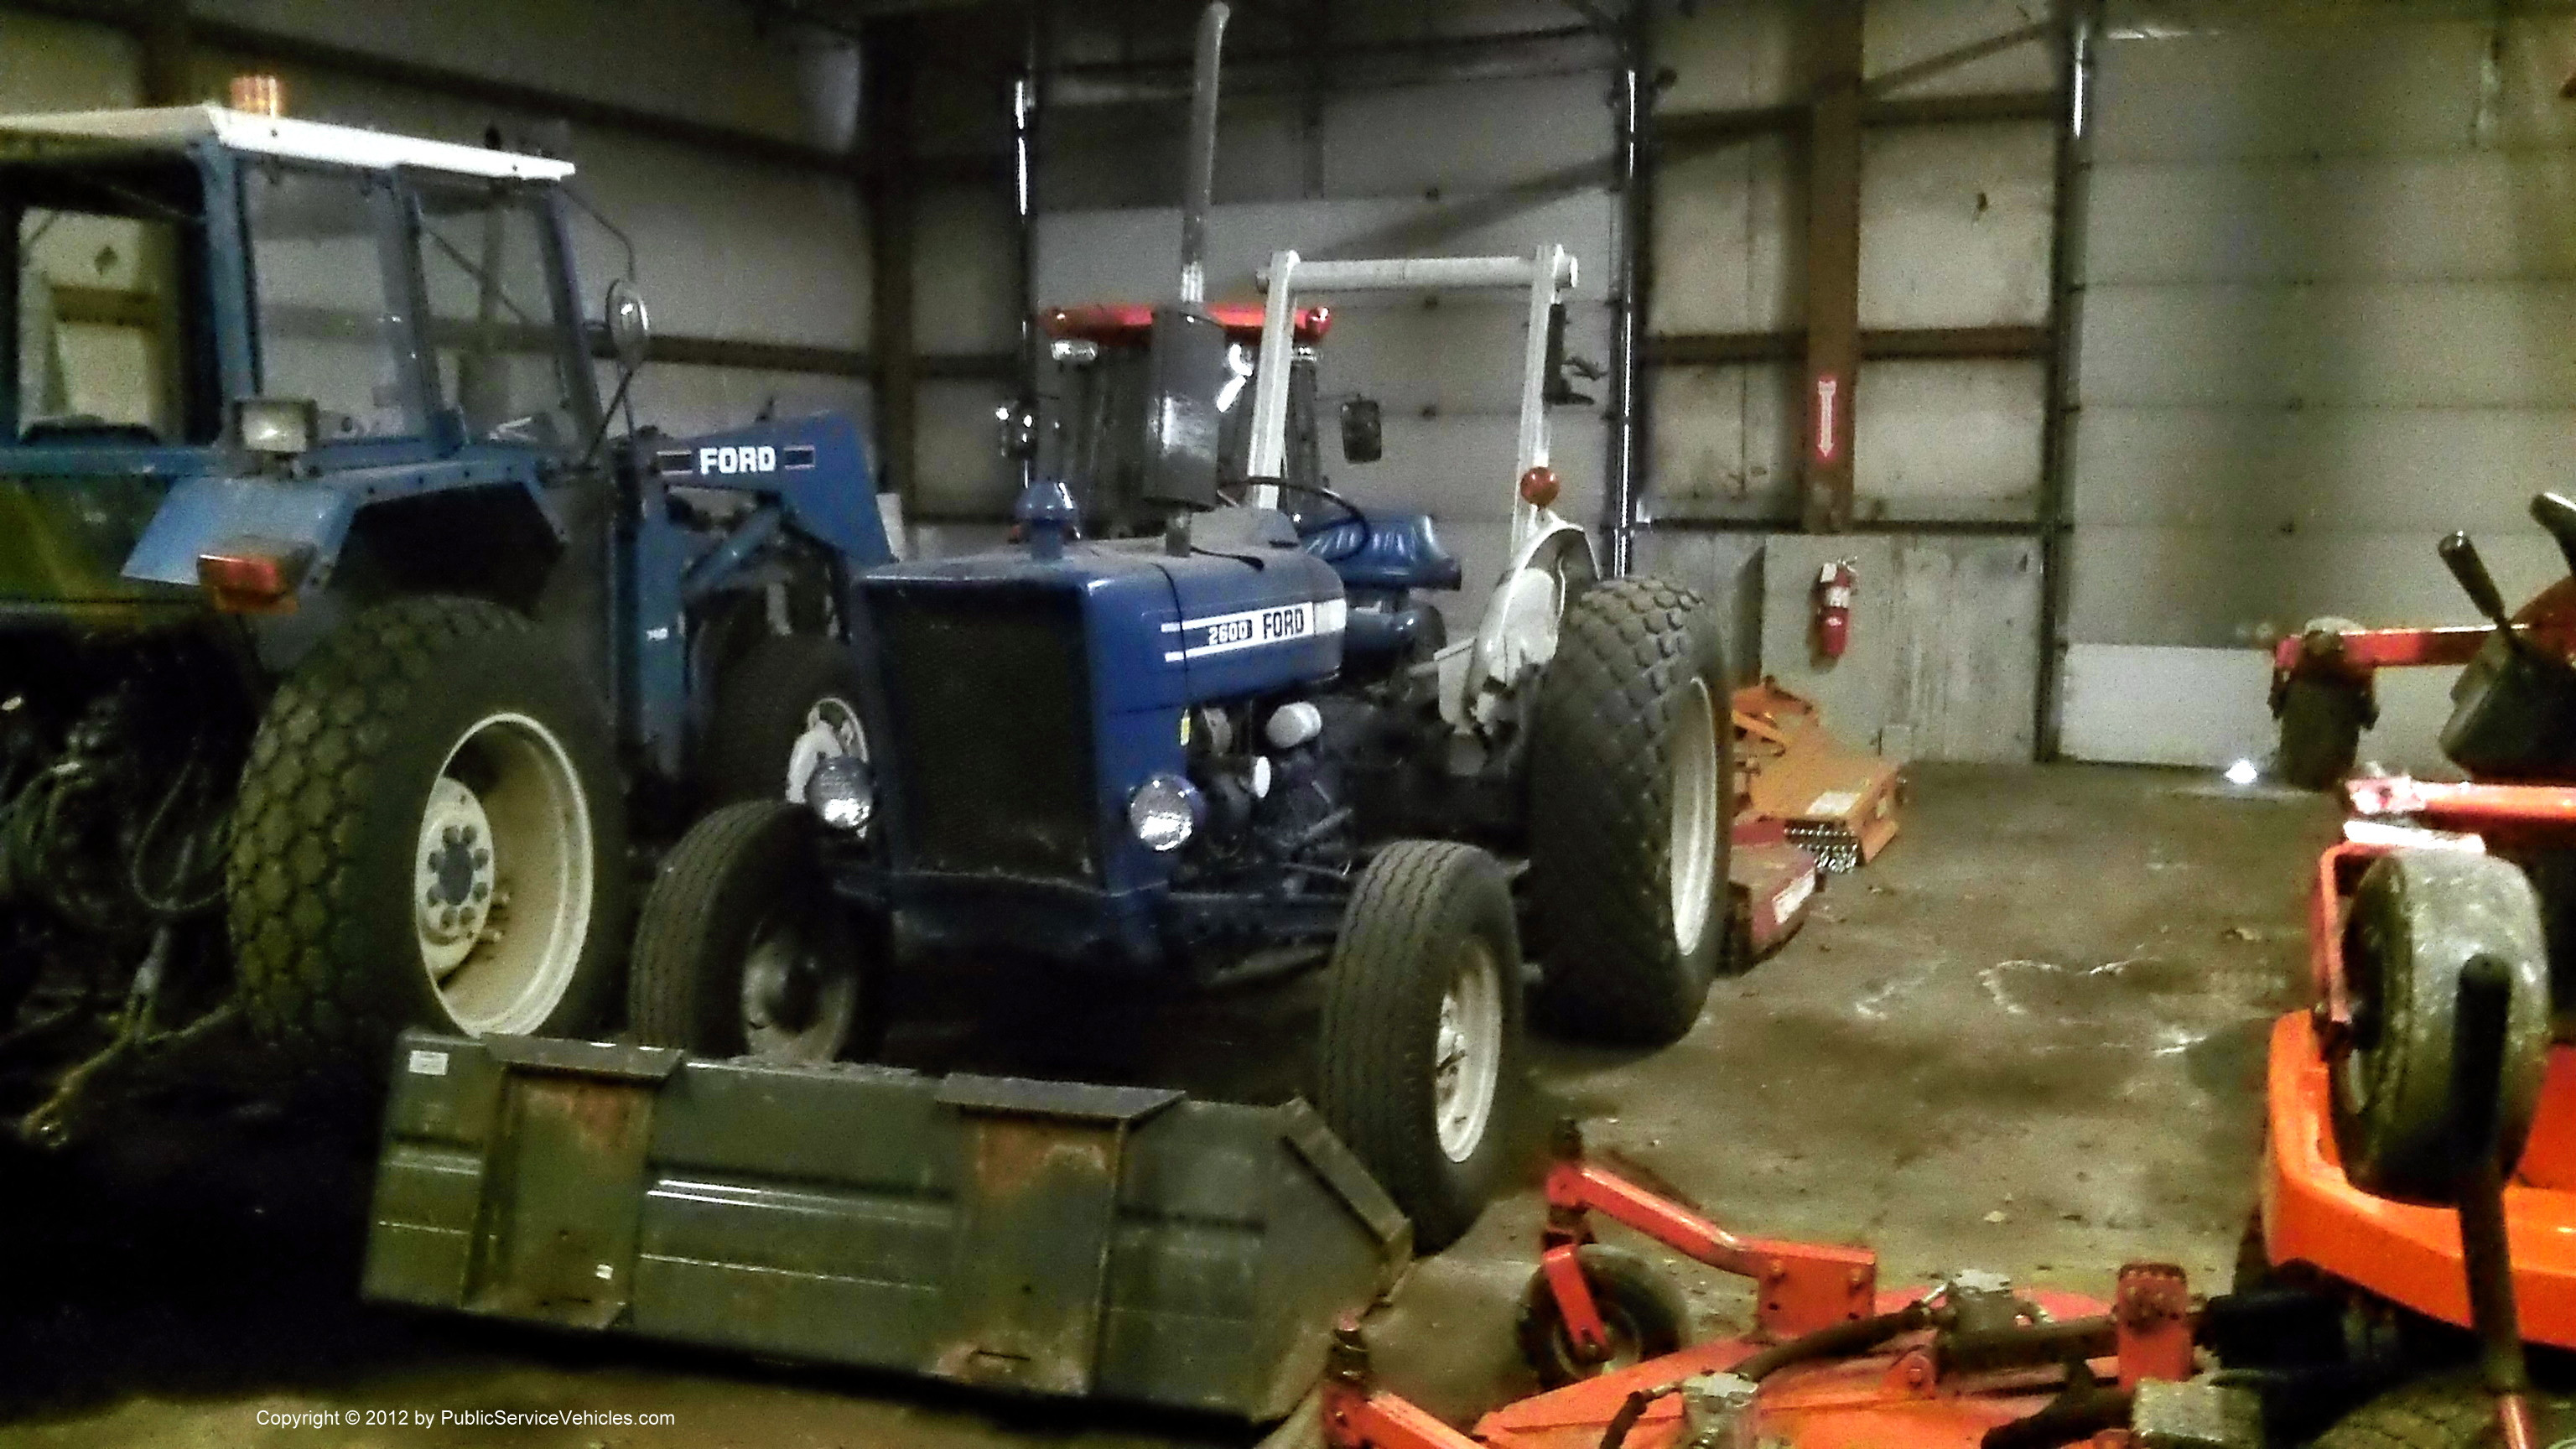 A photo  of Barrington Public Works
            Tractor 49, a 1978 Ford Tractor             taken by Kieran Egan